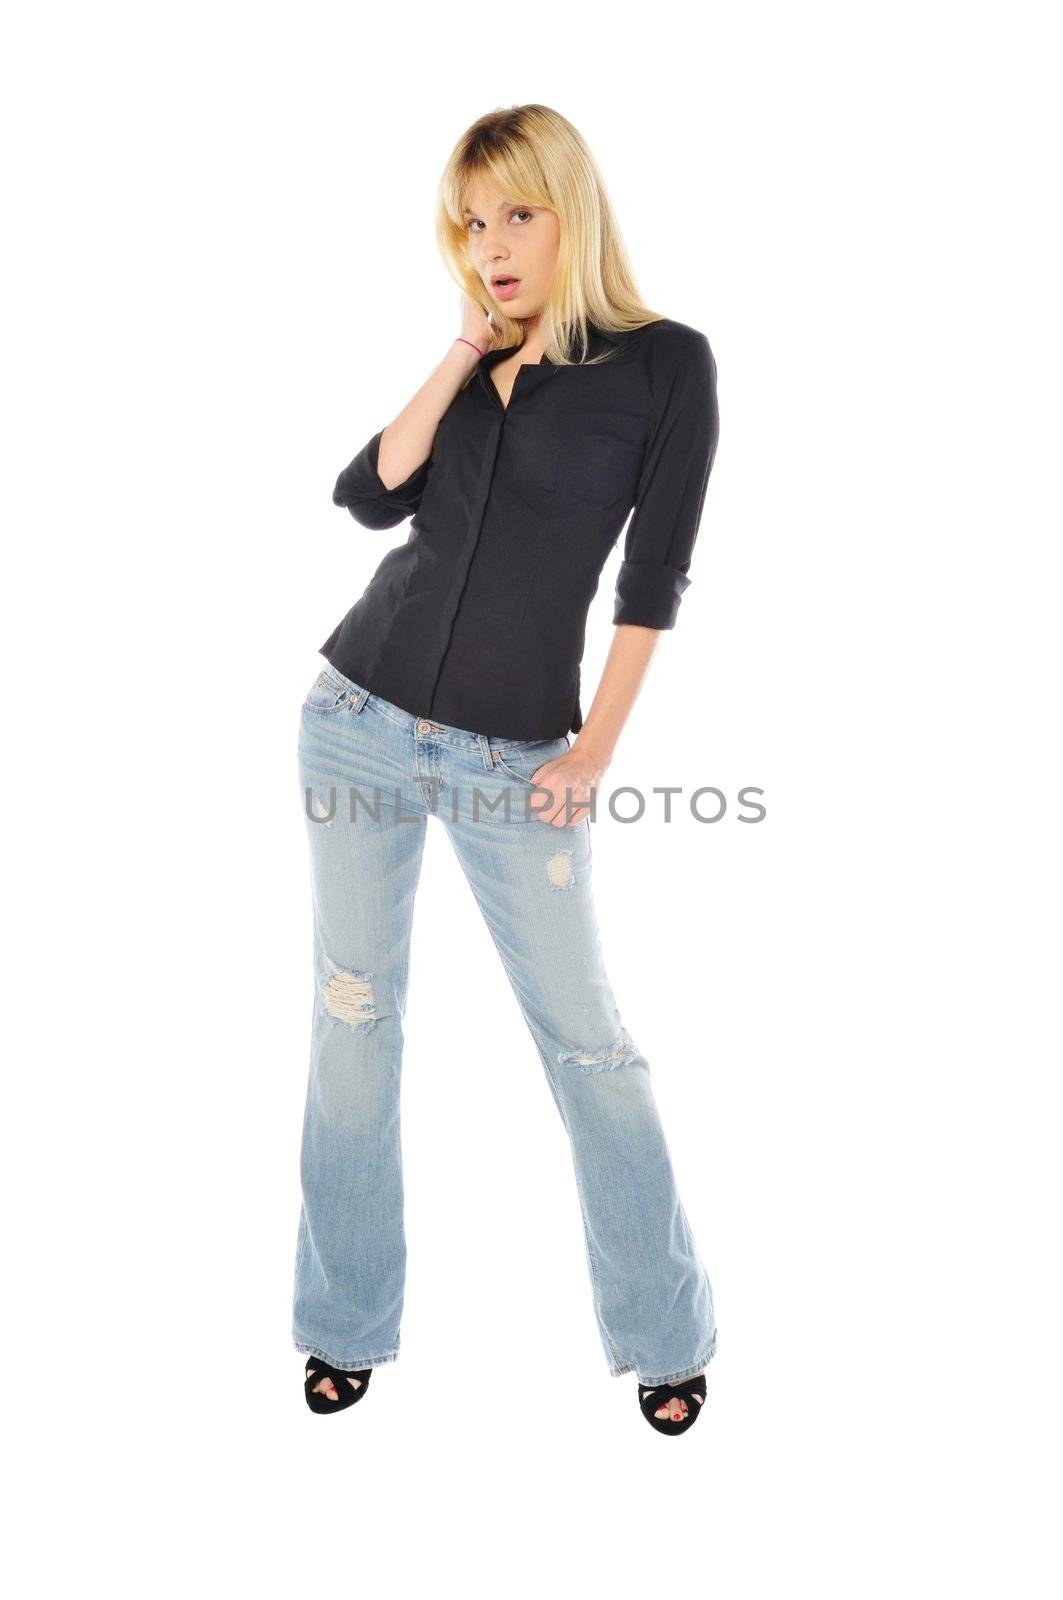 attractive tall skinny blond woman on a white background